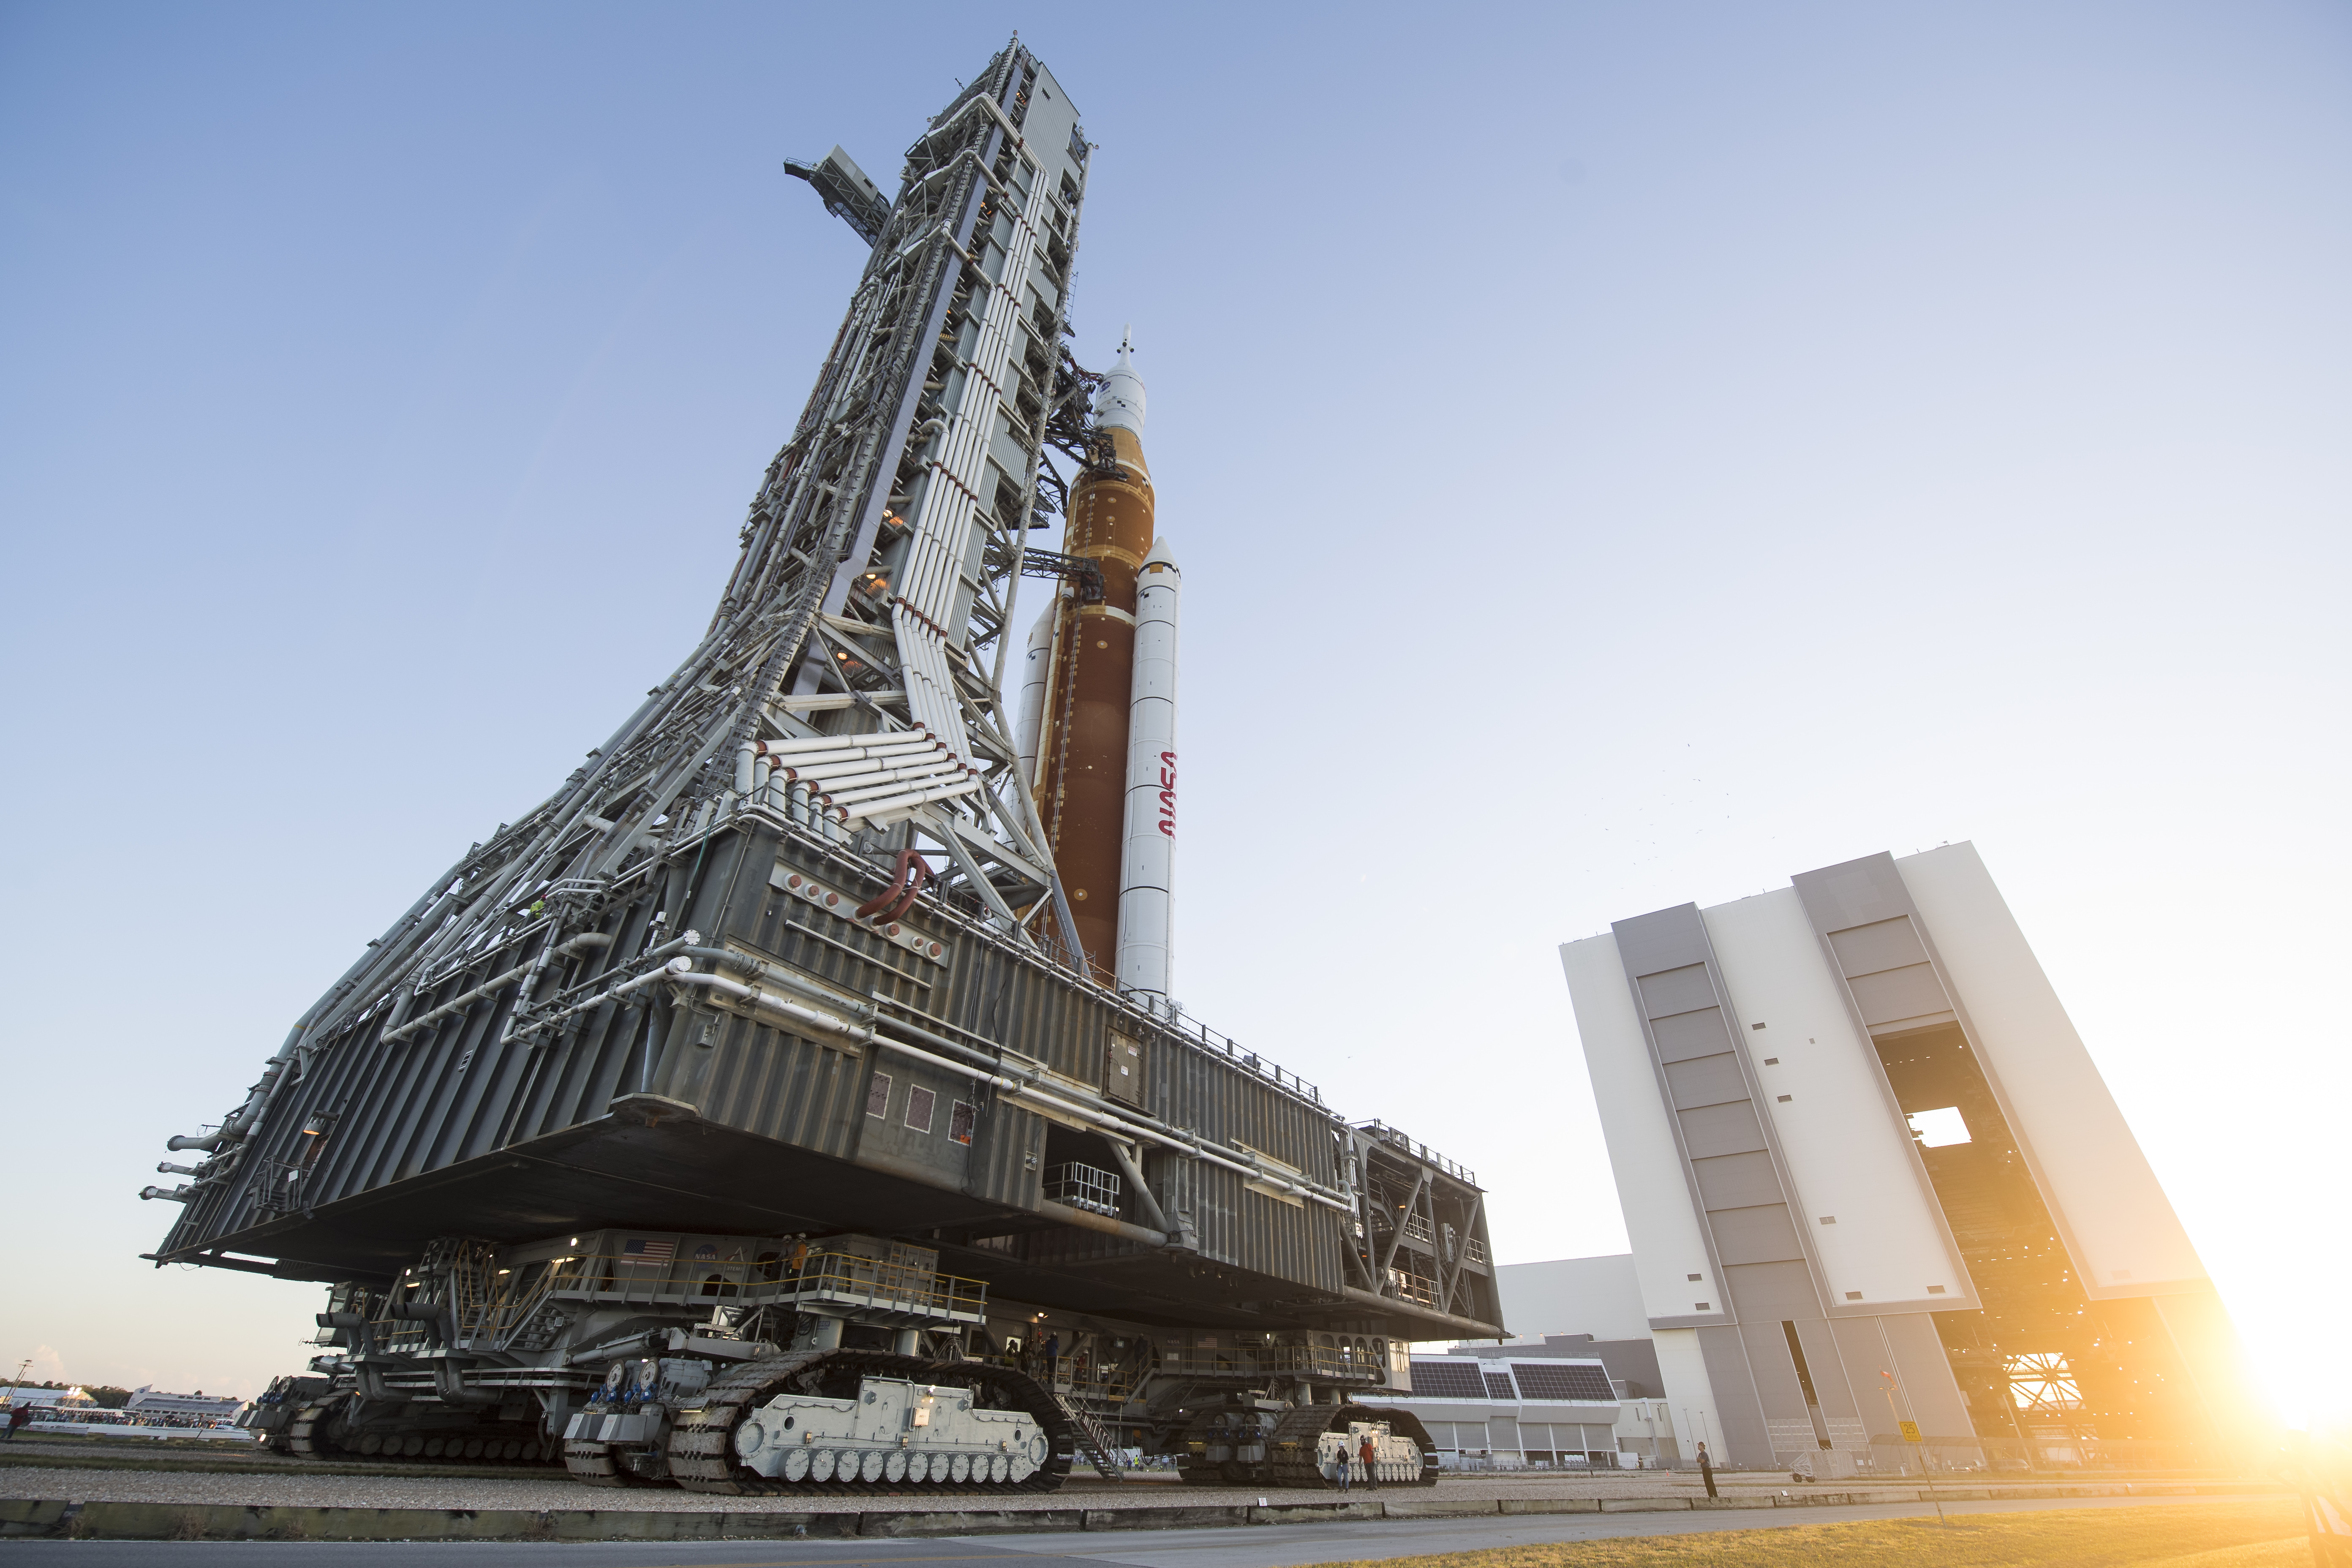 NASA's Artemis I Space Launch System